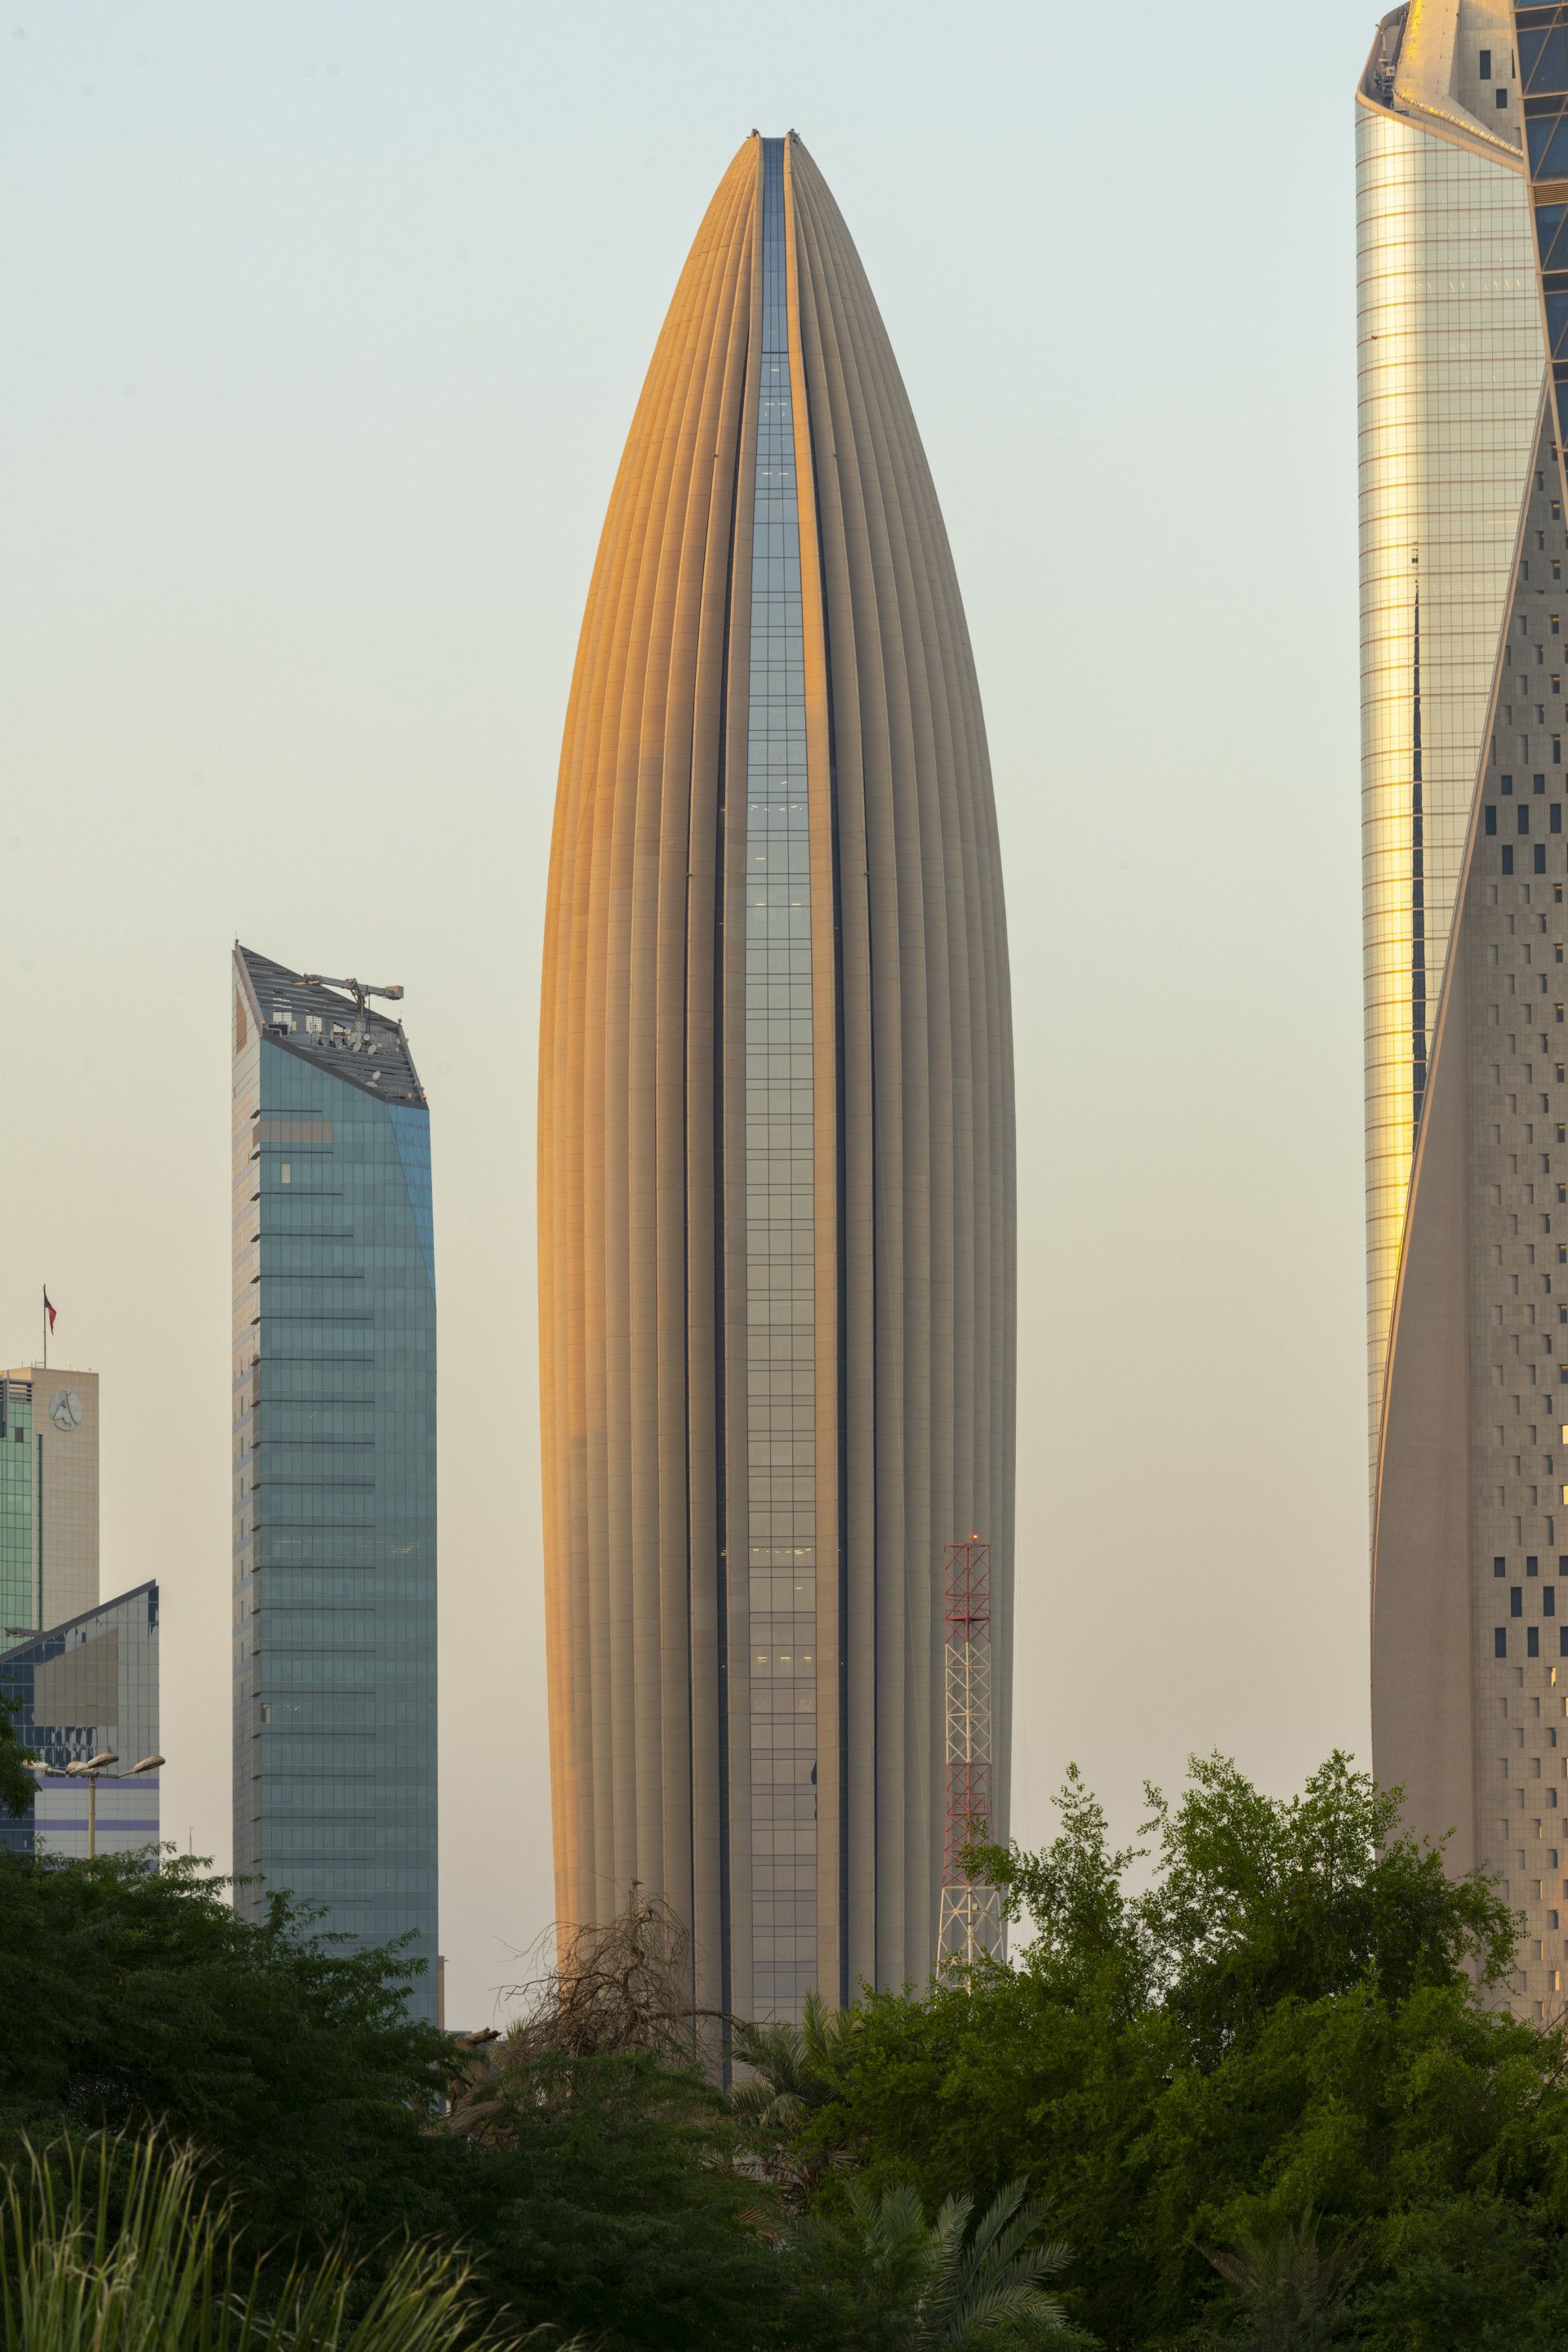 view of a rounded skyscraper clad in concrete fins